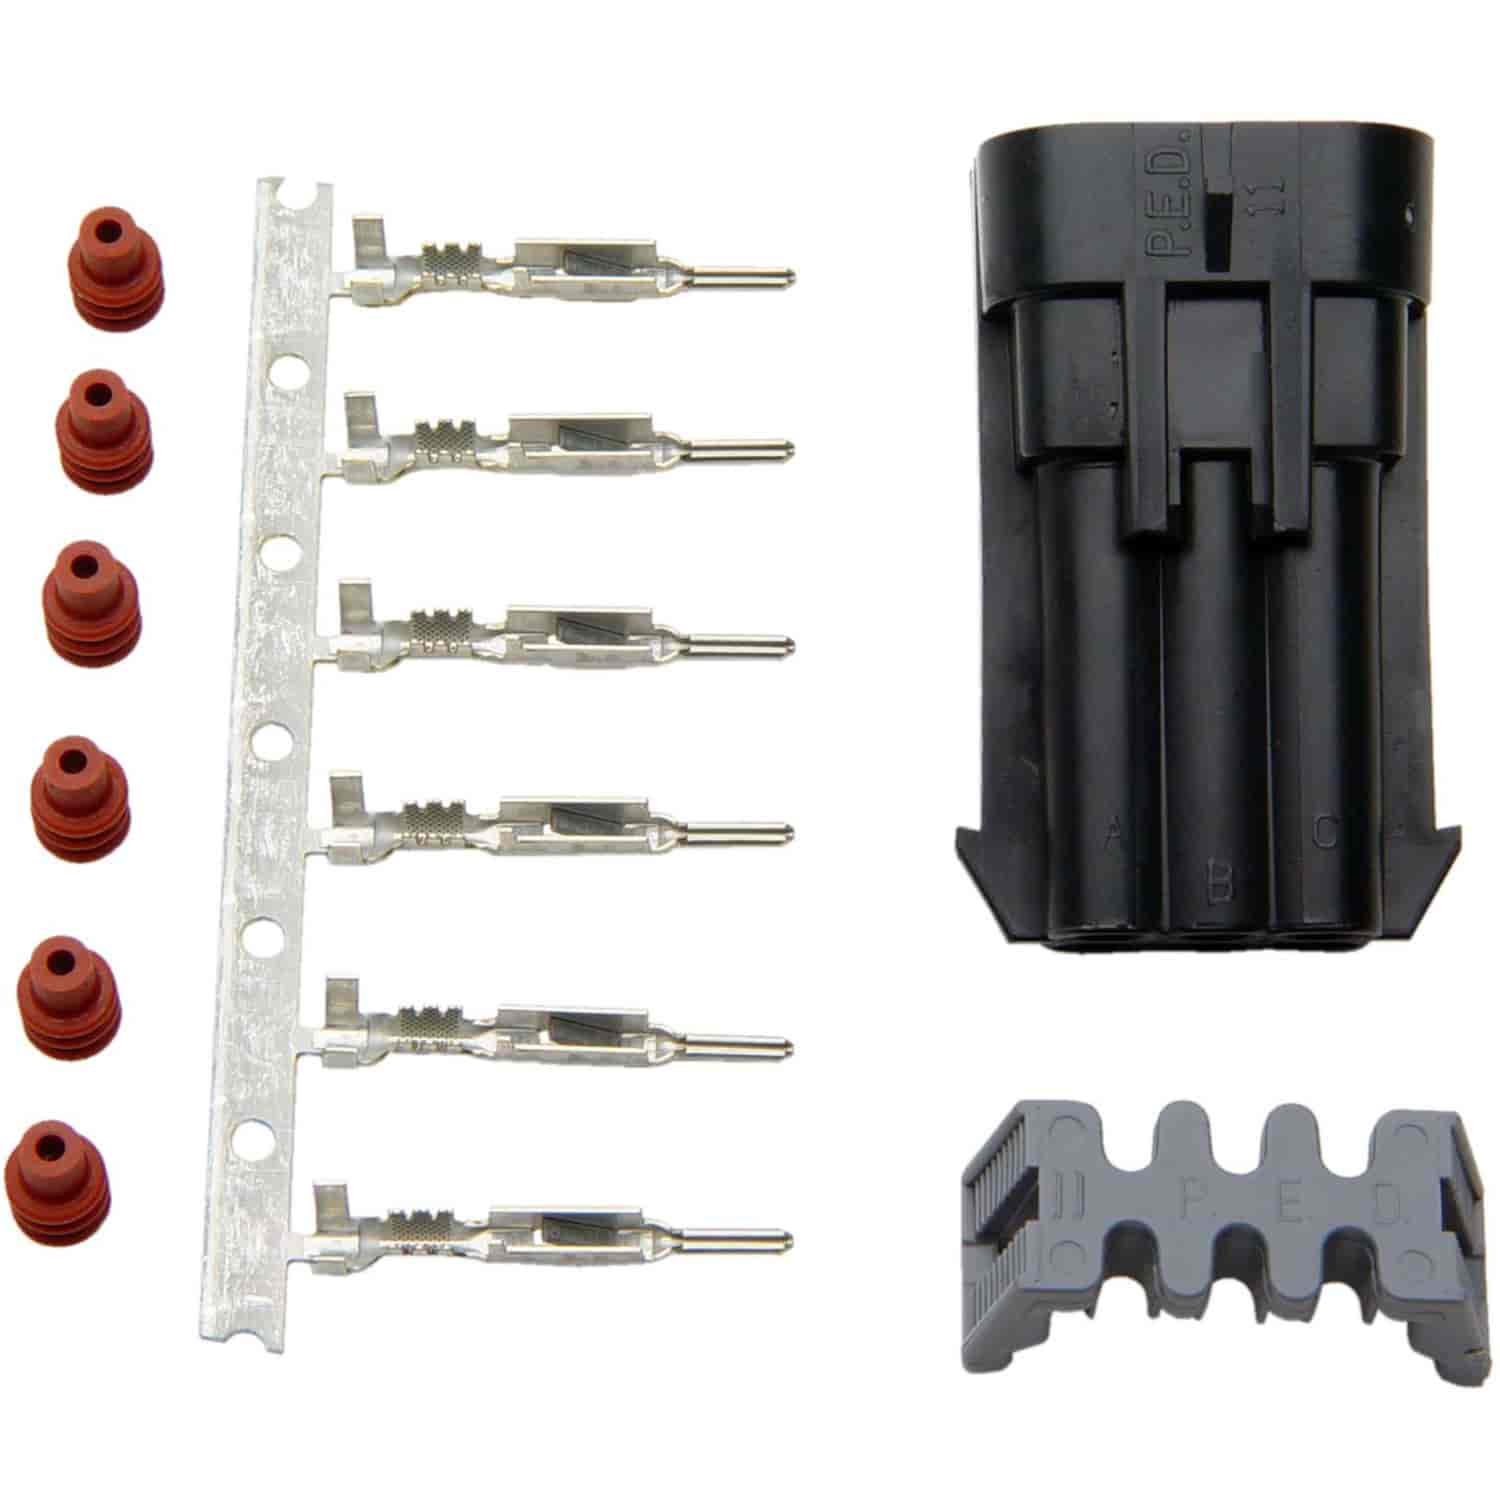 CONNECTOR KIT FAST POWER ADDER